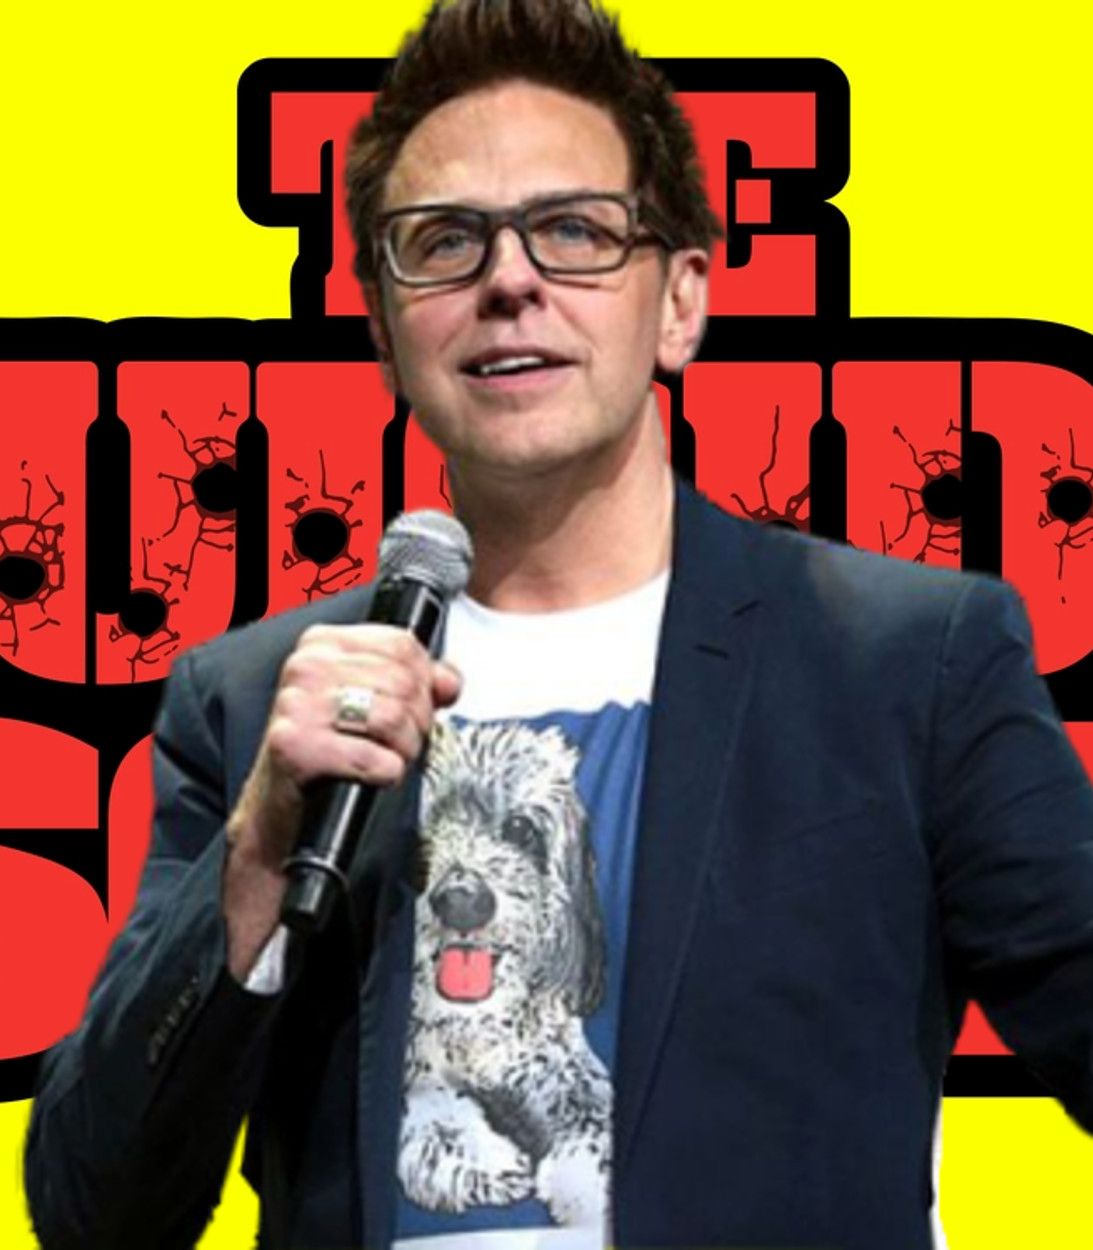 James Gunn with New Suicide Squad Logo Vertical